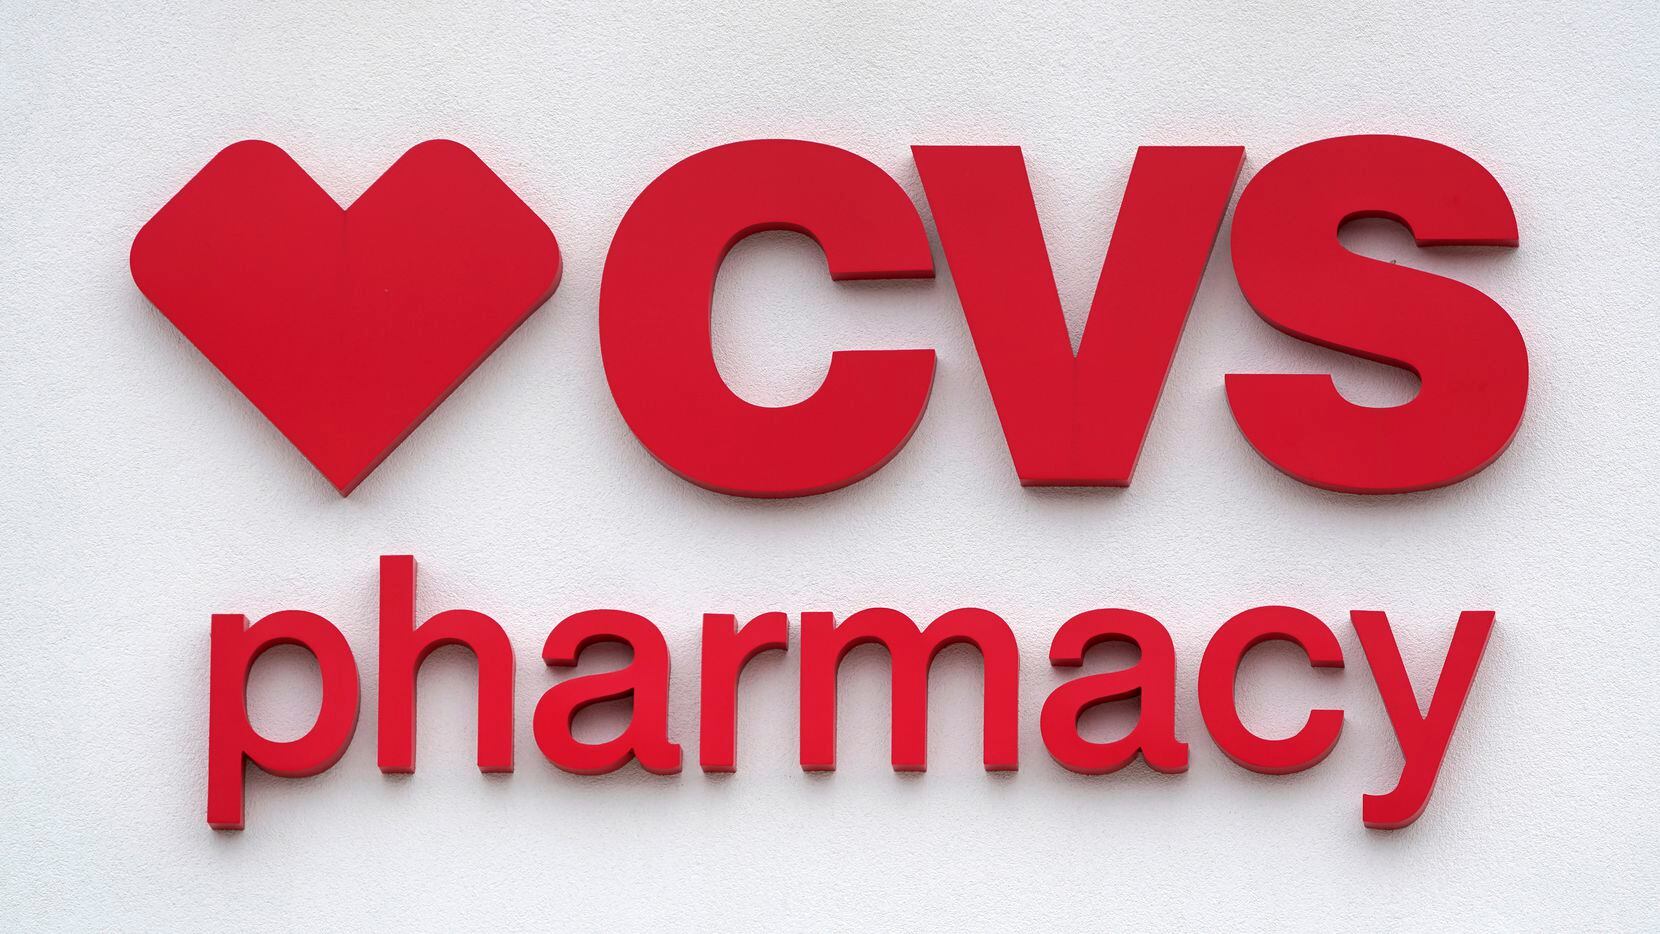 CVS Health operates nearly 10,000 retail locations complete with pharmacies and...